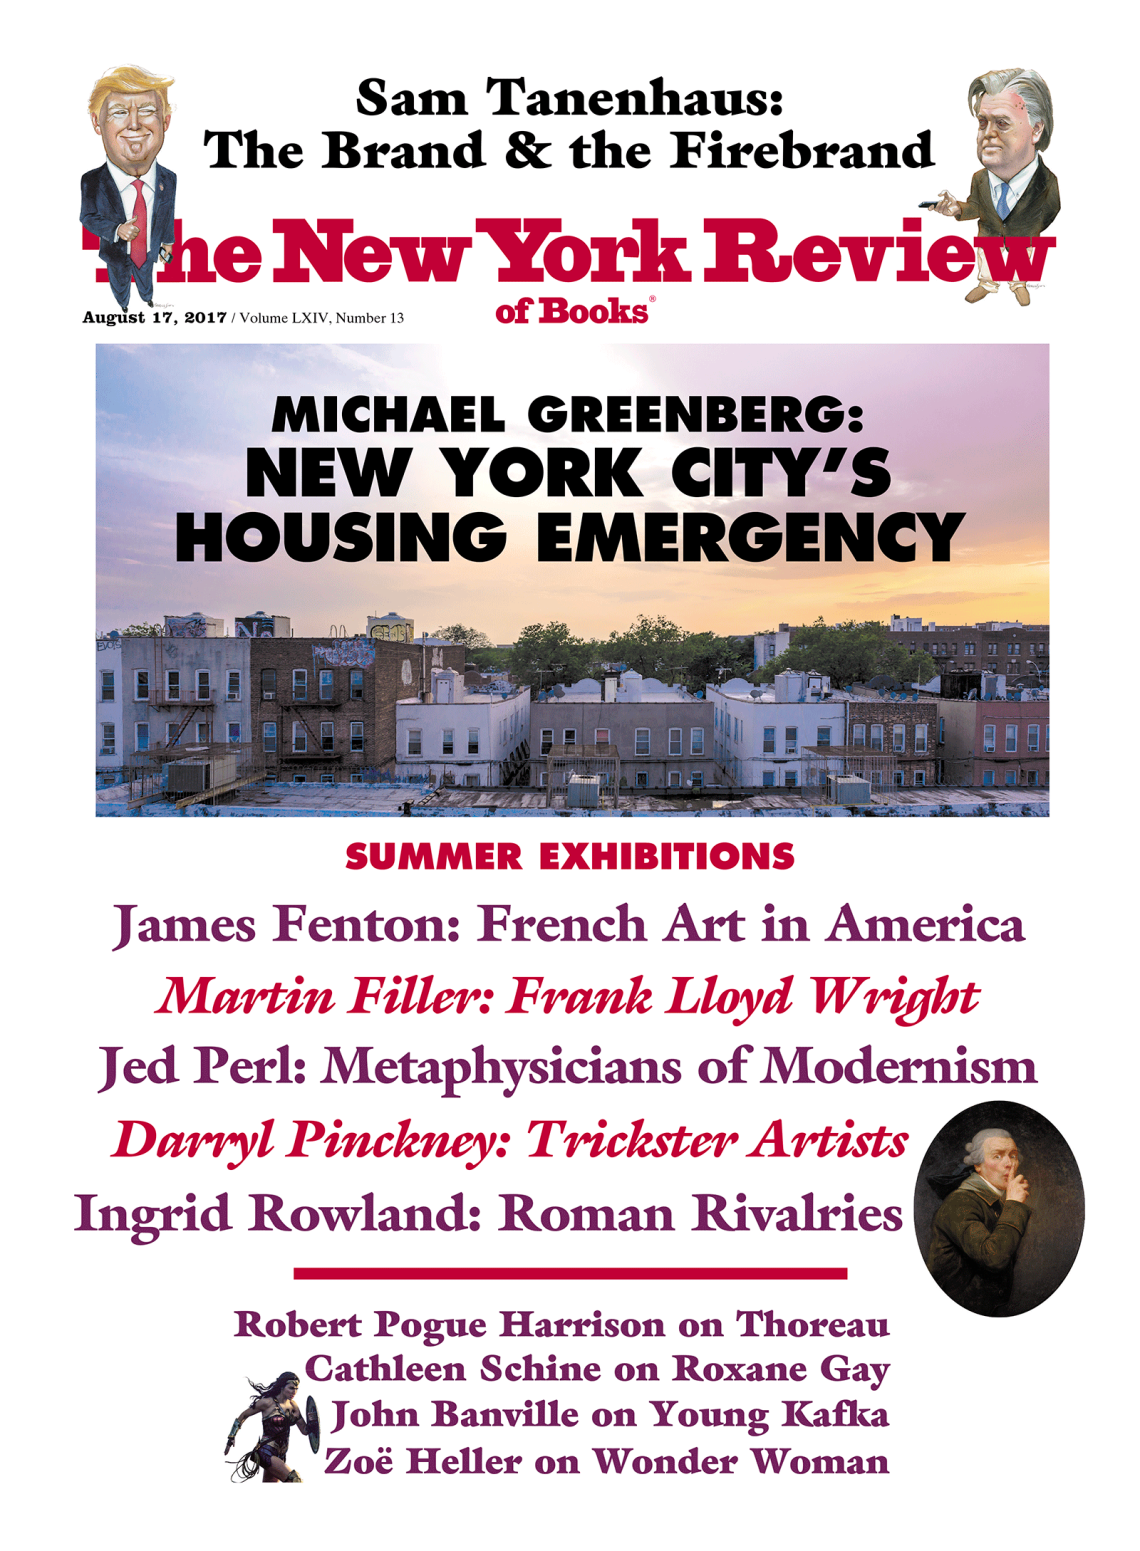 Image of the August 17, 2017 issue cover.